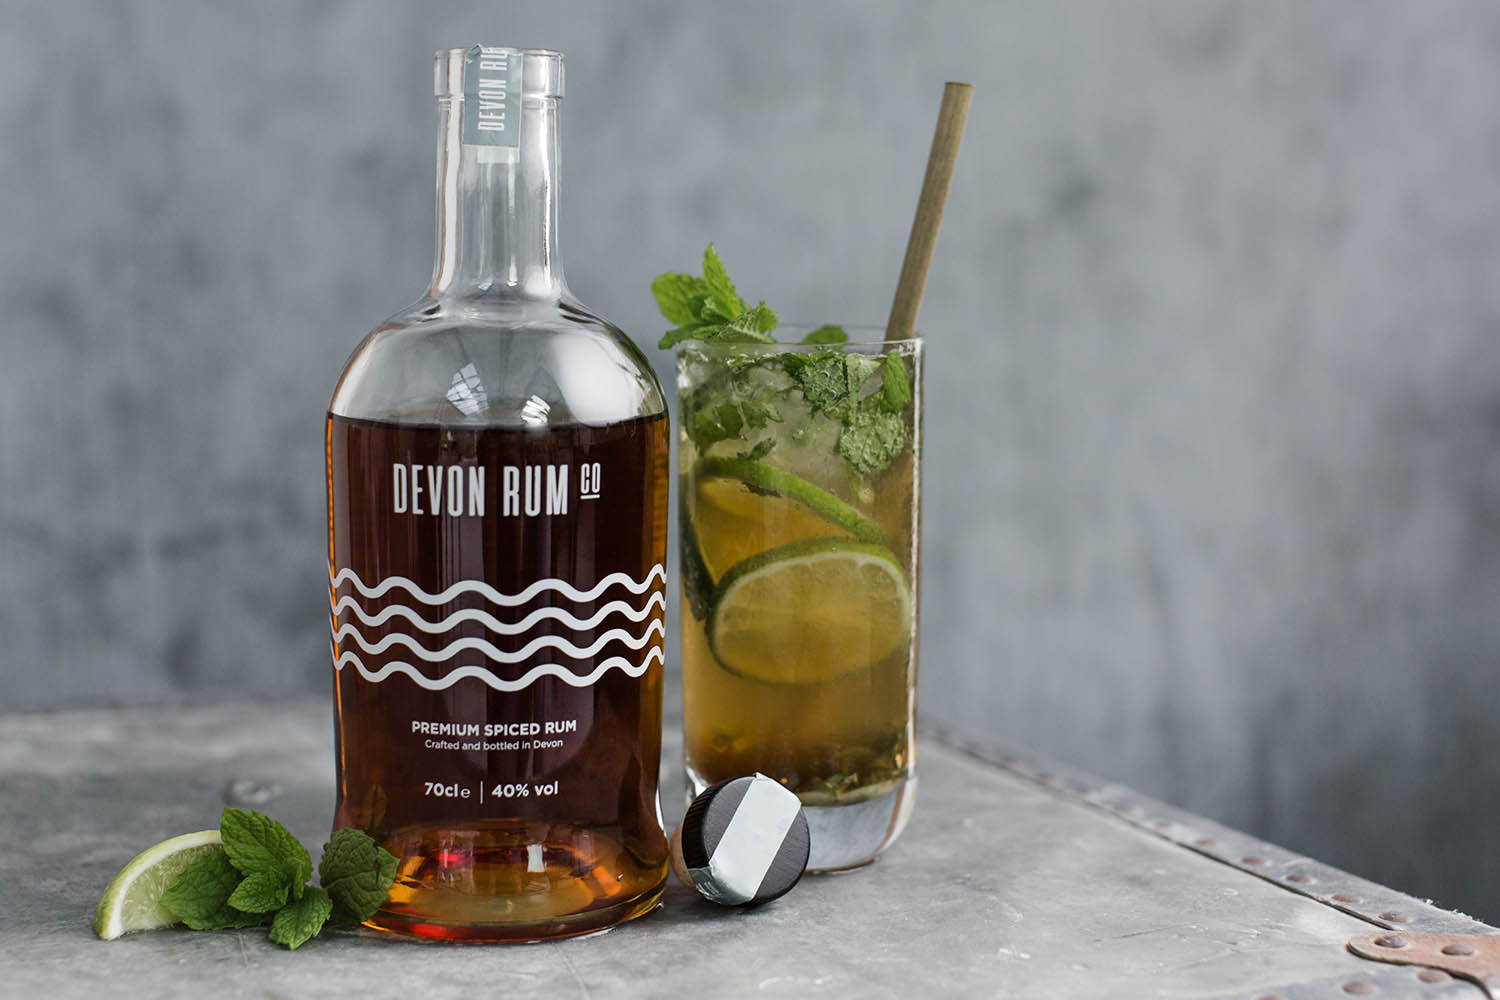 OPen bottle of Devon Rum with a mixed mojito cocktail next to it